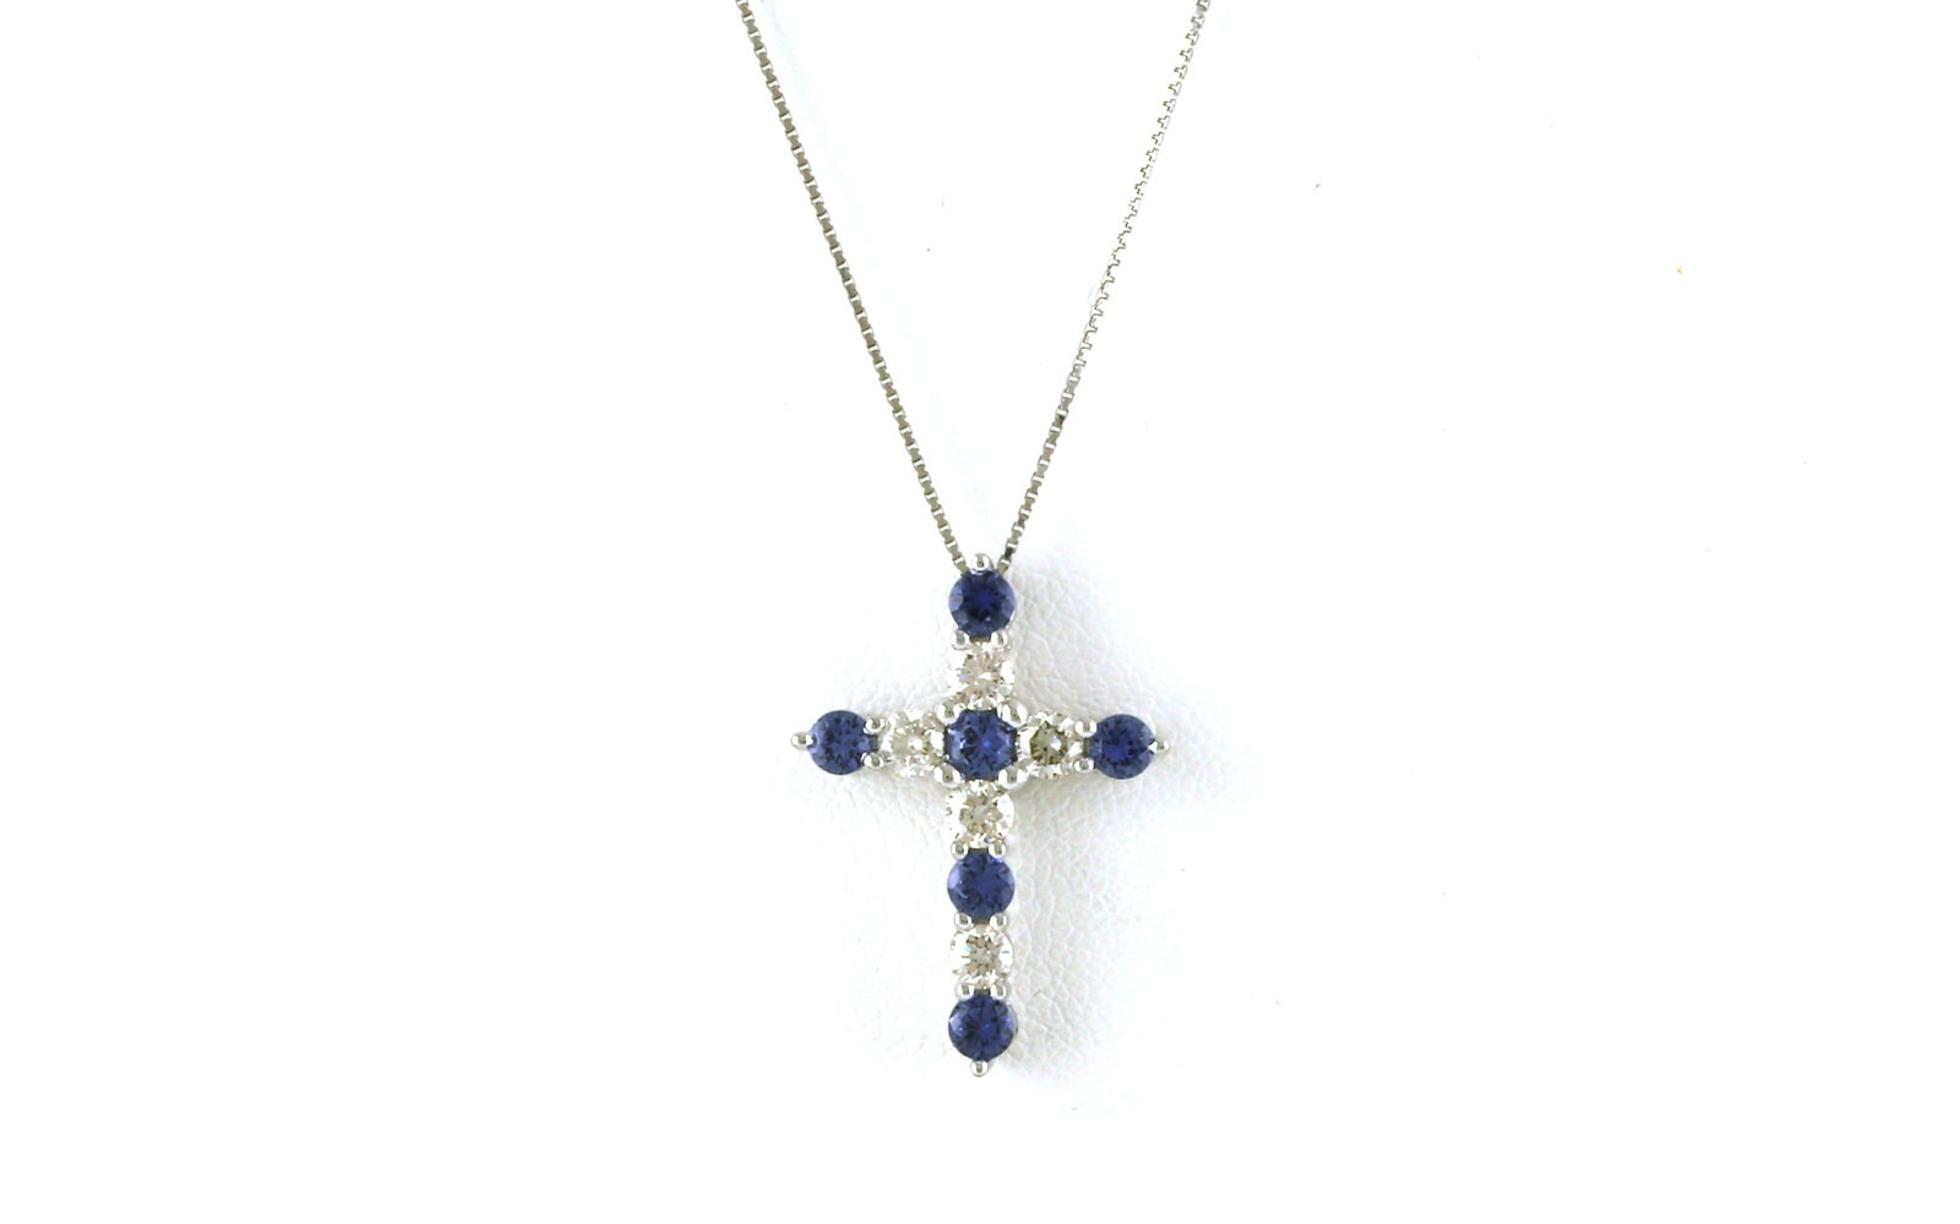 11-Stone Montana Yogo Sapphire and Diamond Cross Necklace in White Gold (1.13cts TWT)